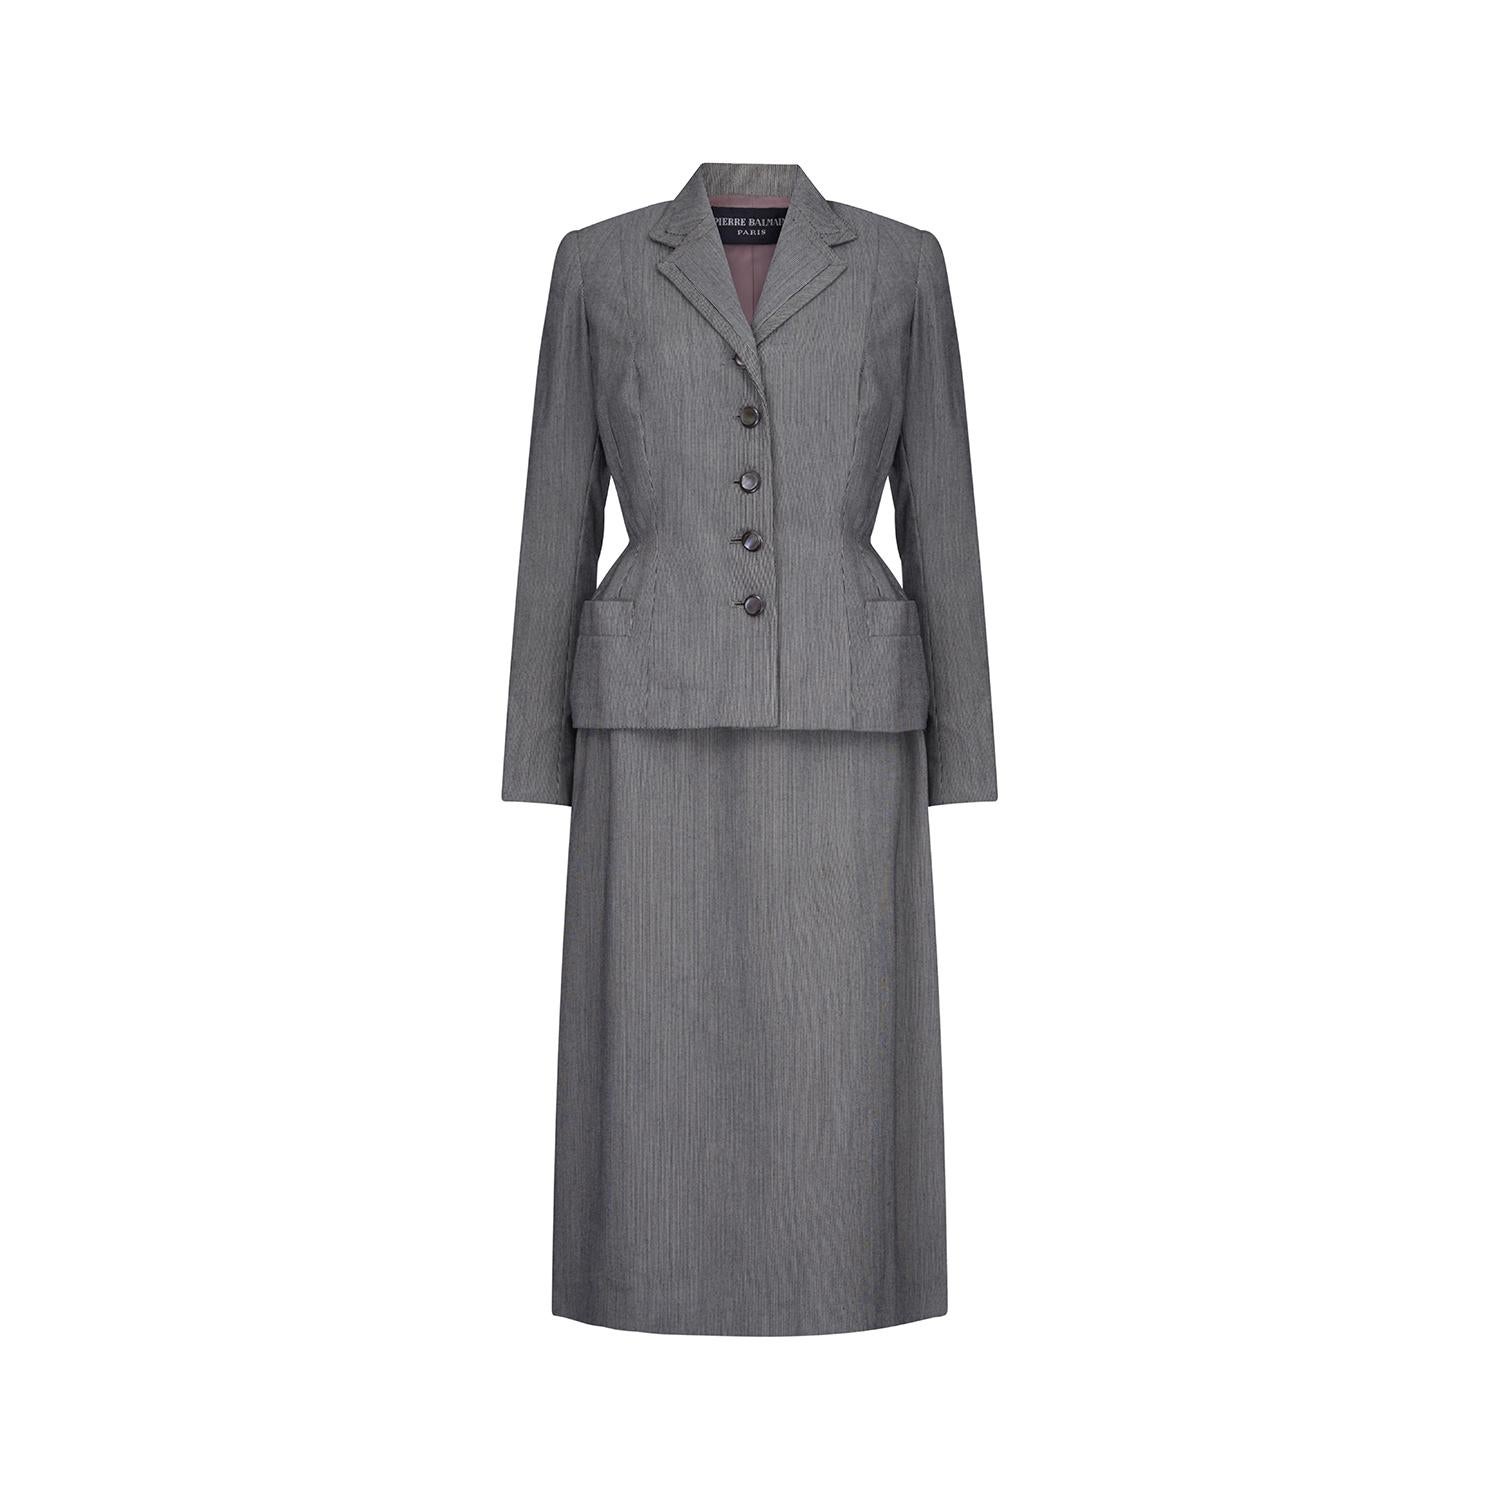 Fine and rare Pierre Balmain haute couture grey bar jacket and skirt suit attributed to the autumn / winter 1949 collection.  The jacket is tailored in a beautiful pinstripe wool with five iridescent buttons running down the middle front of the